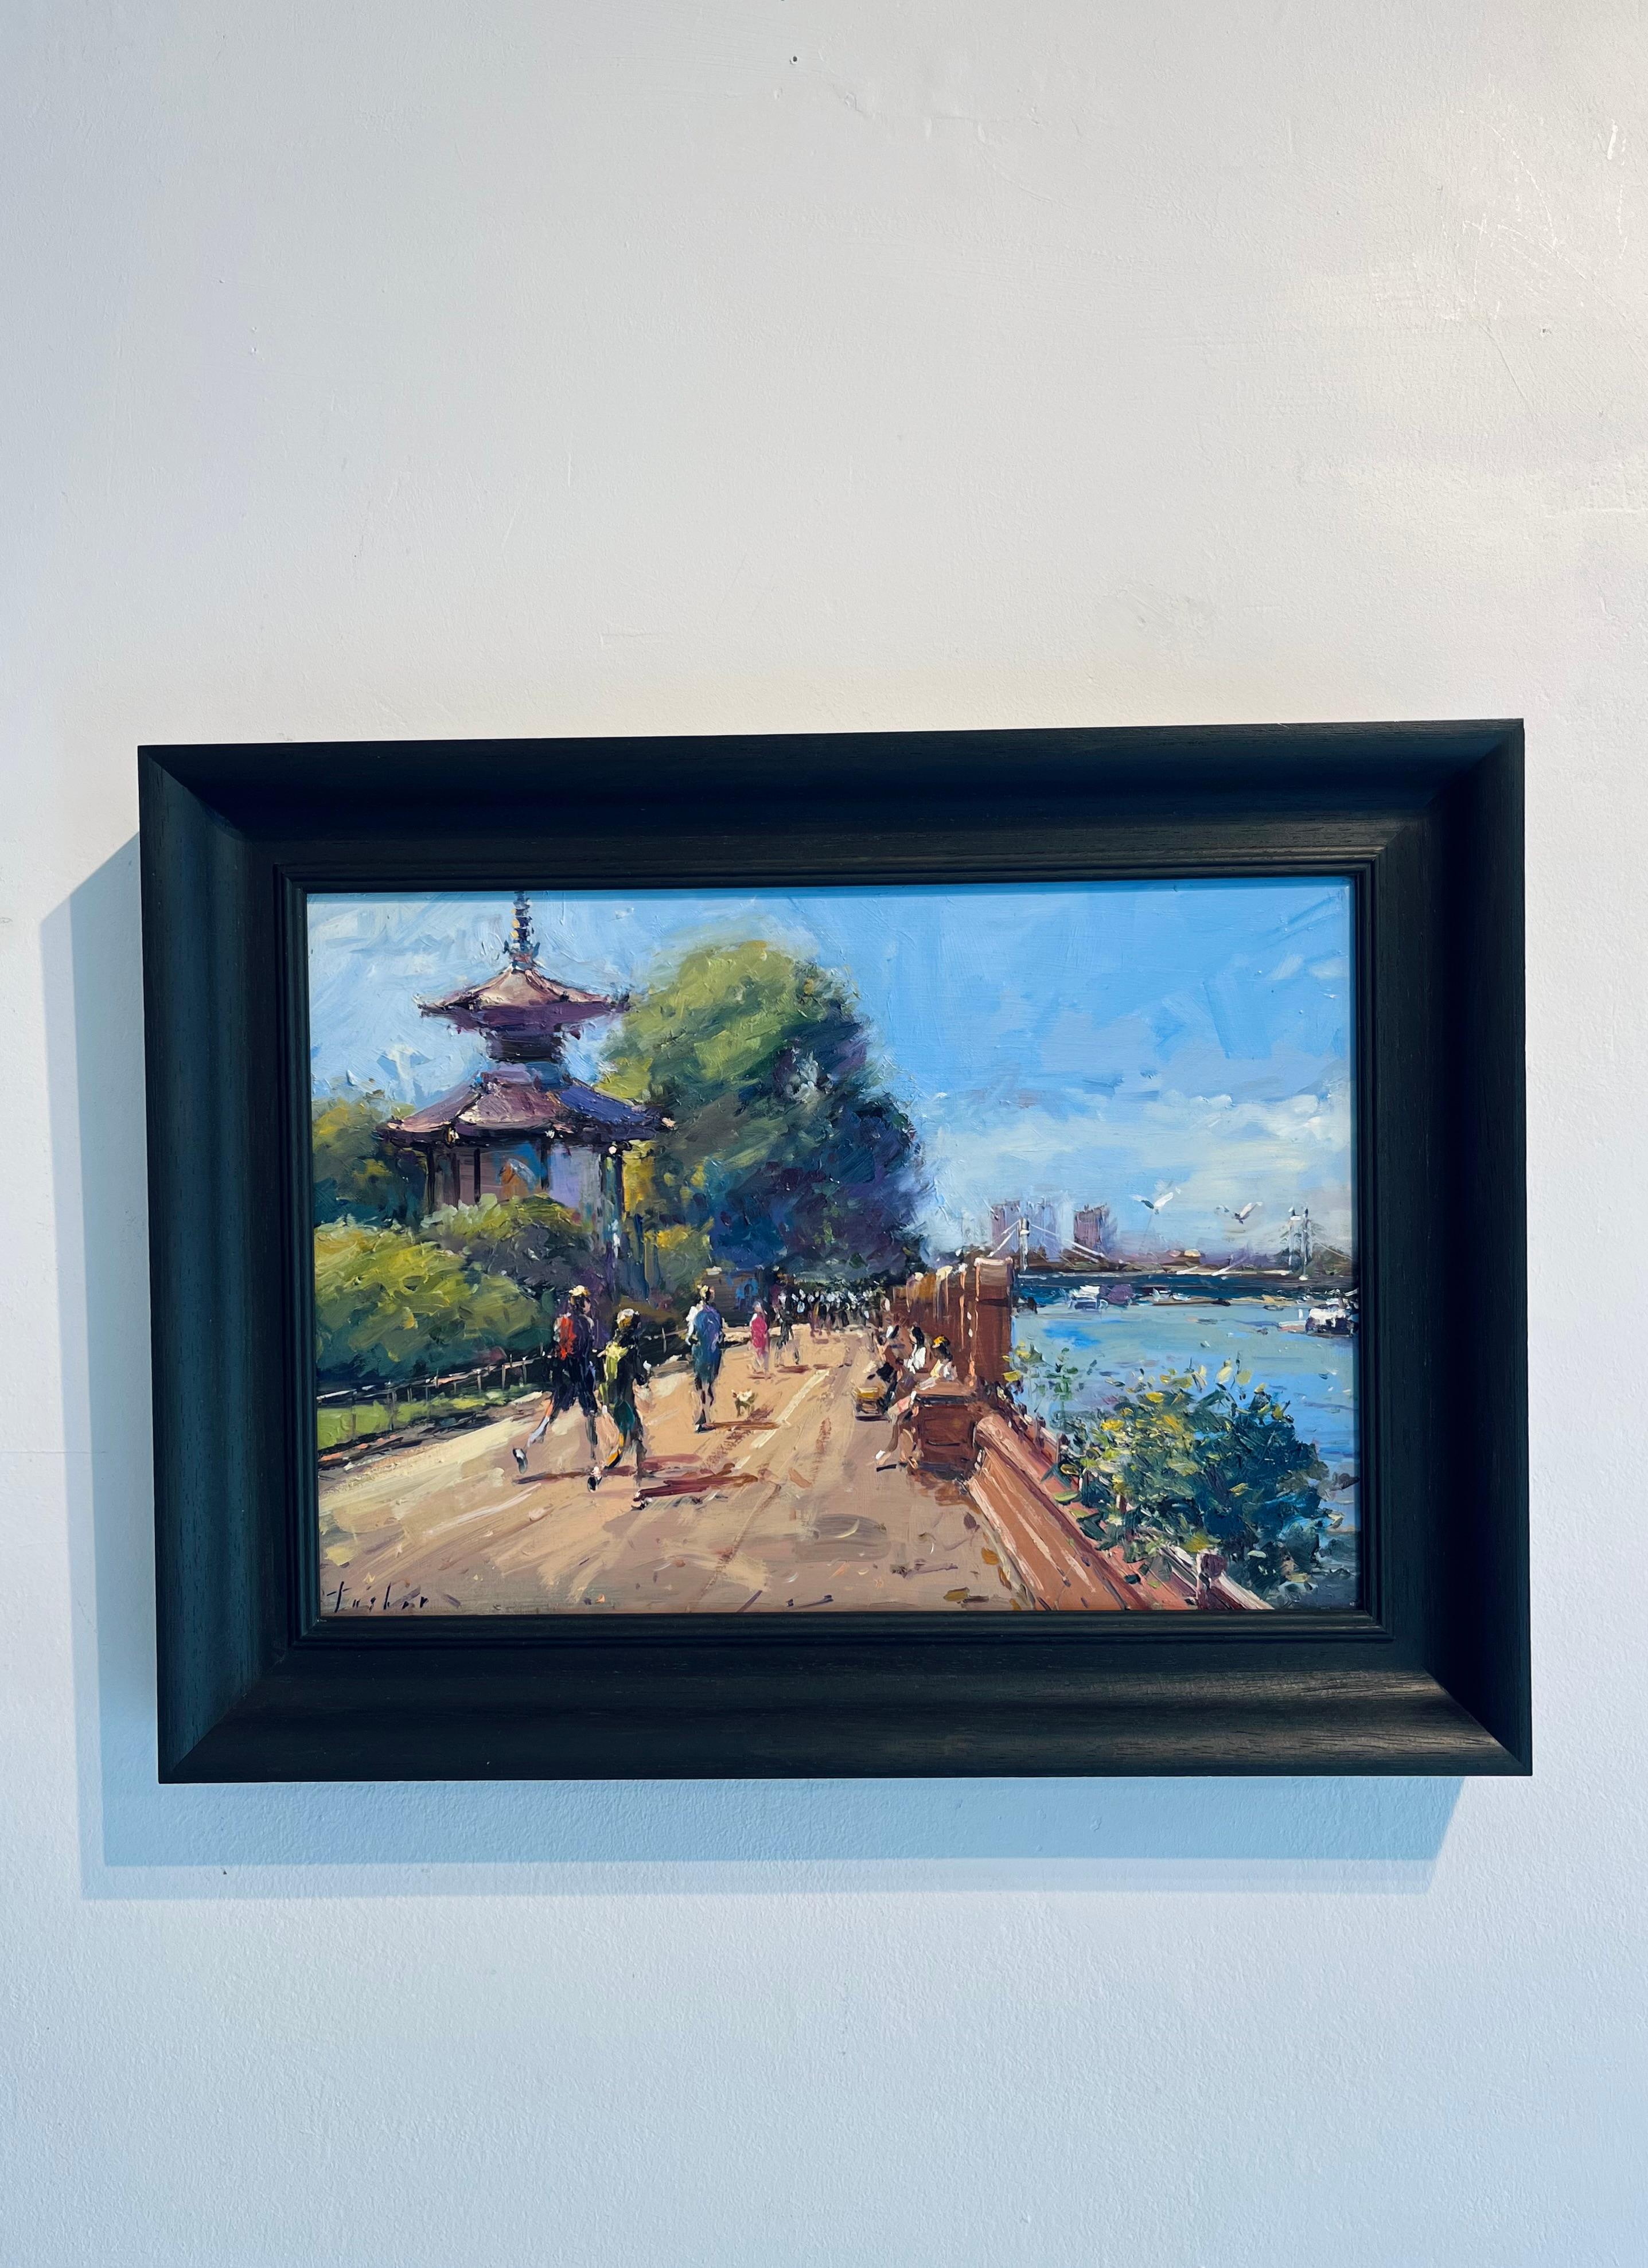 Joggers at Battersea Park-original impressionism cityscape oil painting-Artwork - Painting by Tushar Sabale